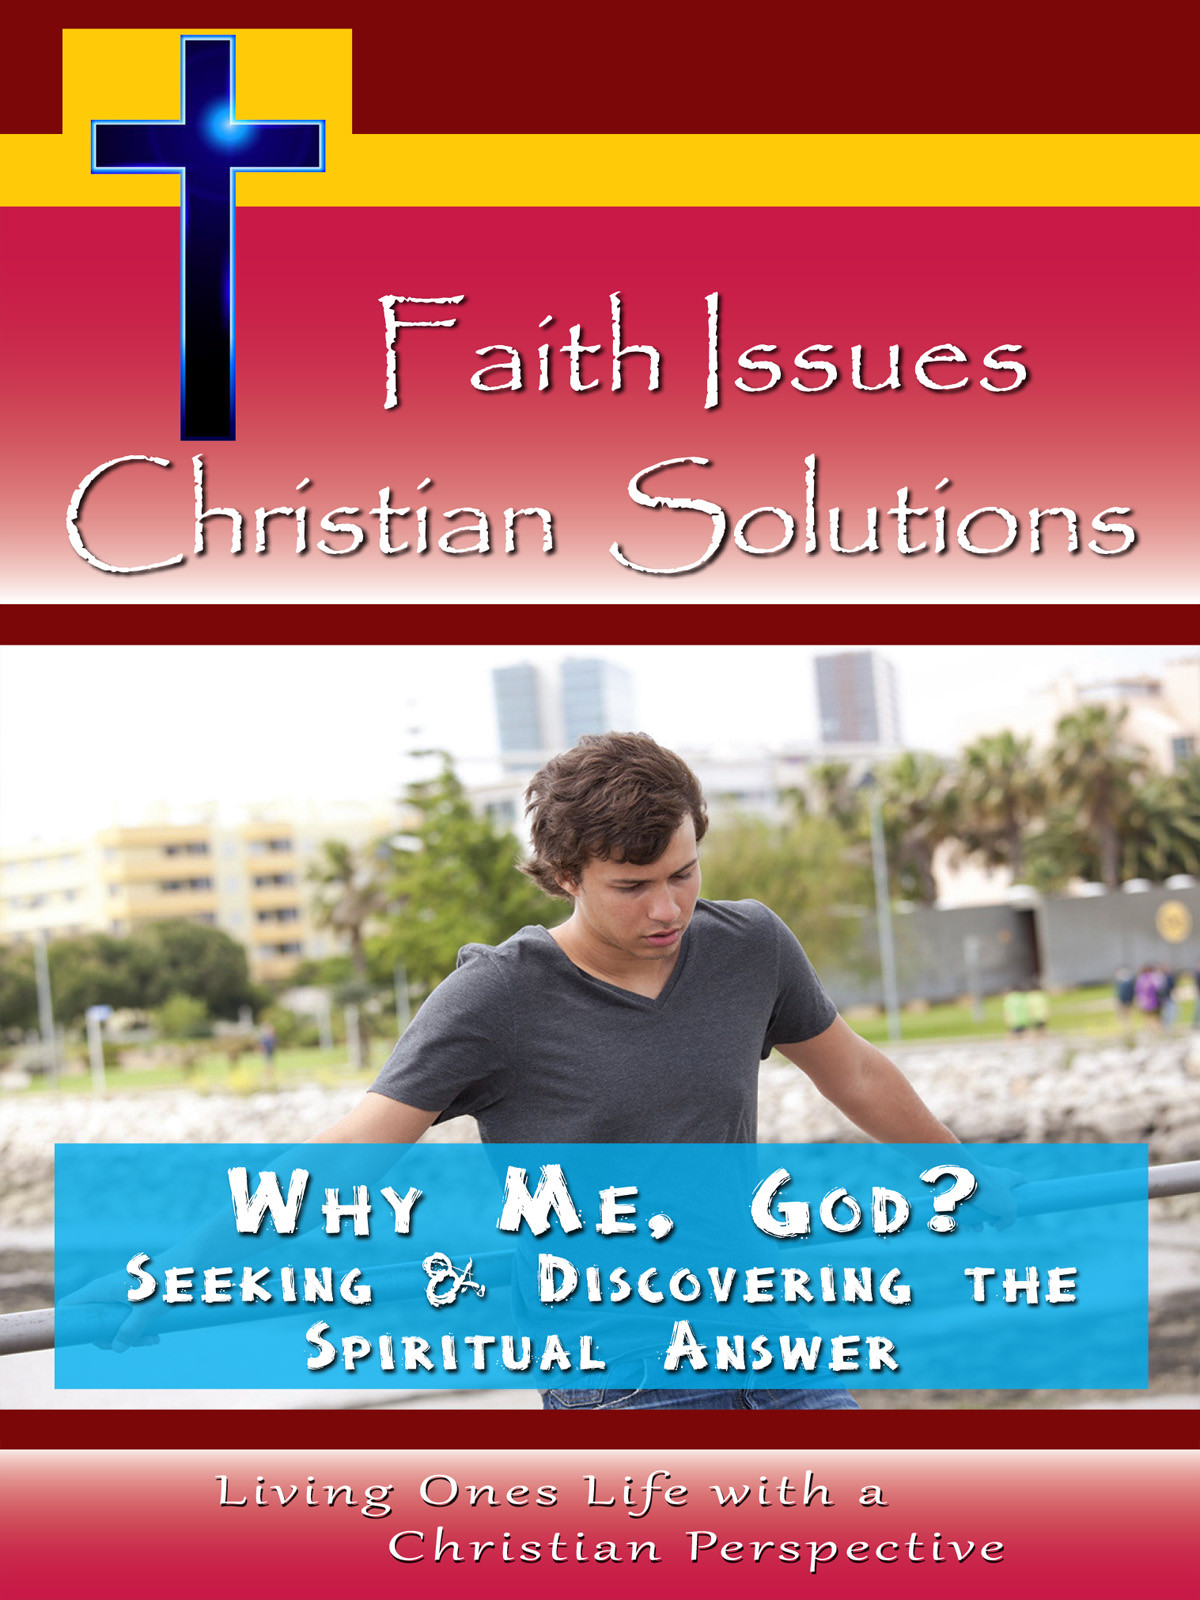 CH10021 - Why Me, God?